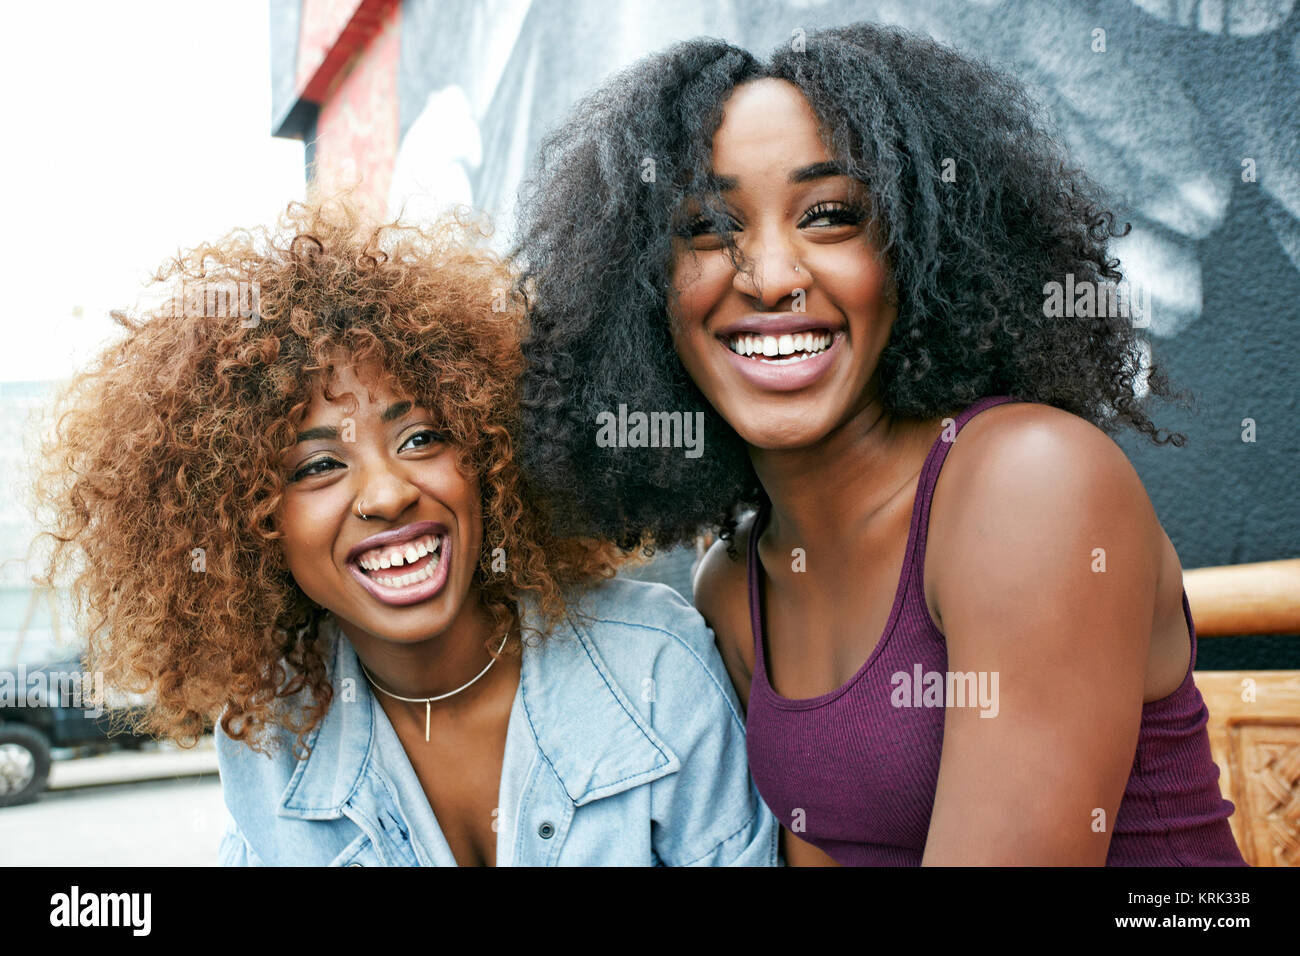 Women laughing outdoors Stock Photo